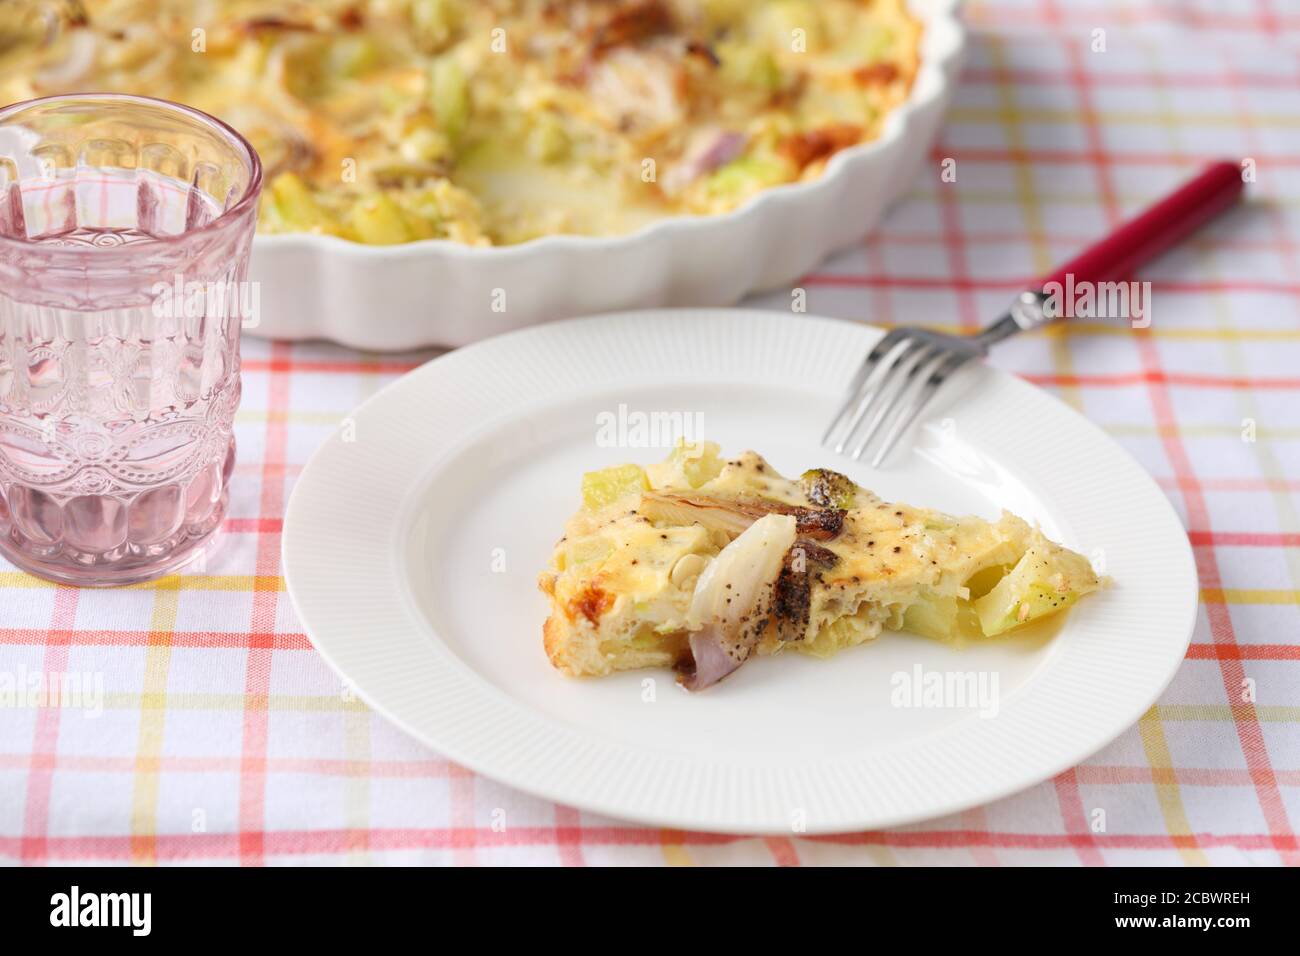 Slice of backed summer squash and onion omelet on a plate Stock Photo